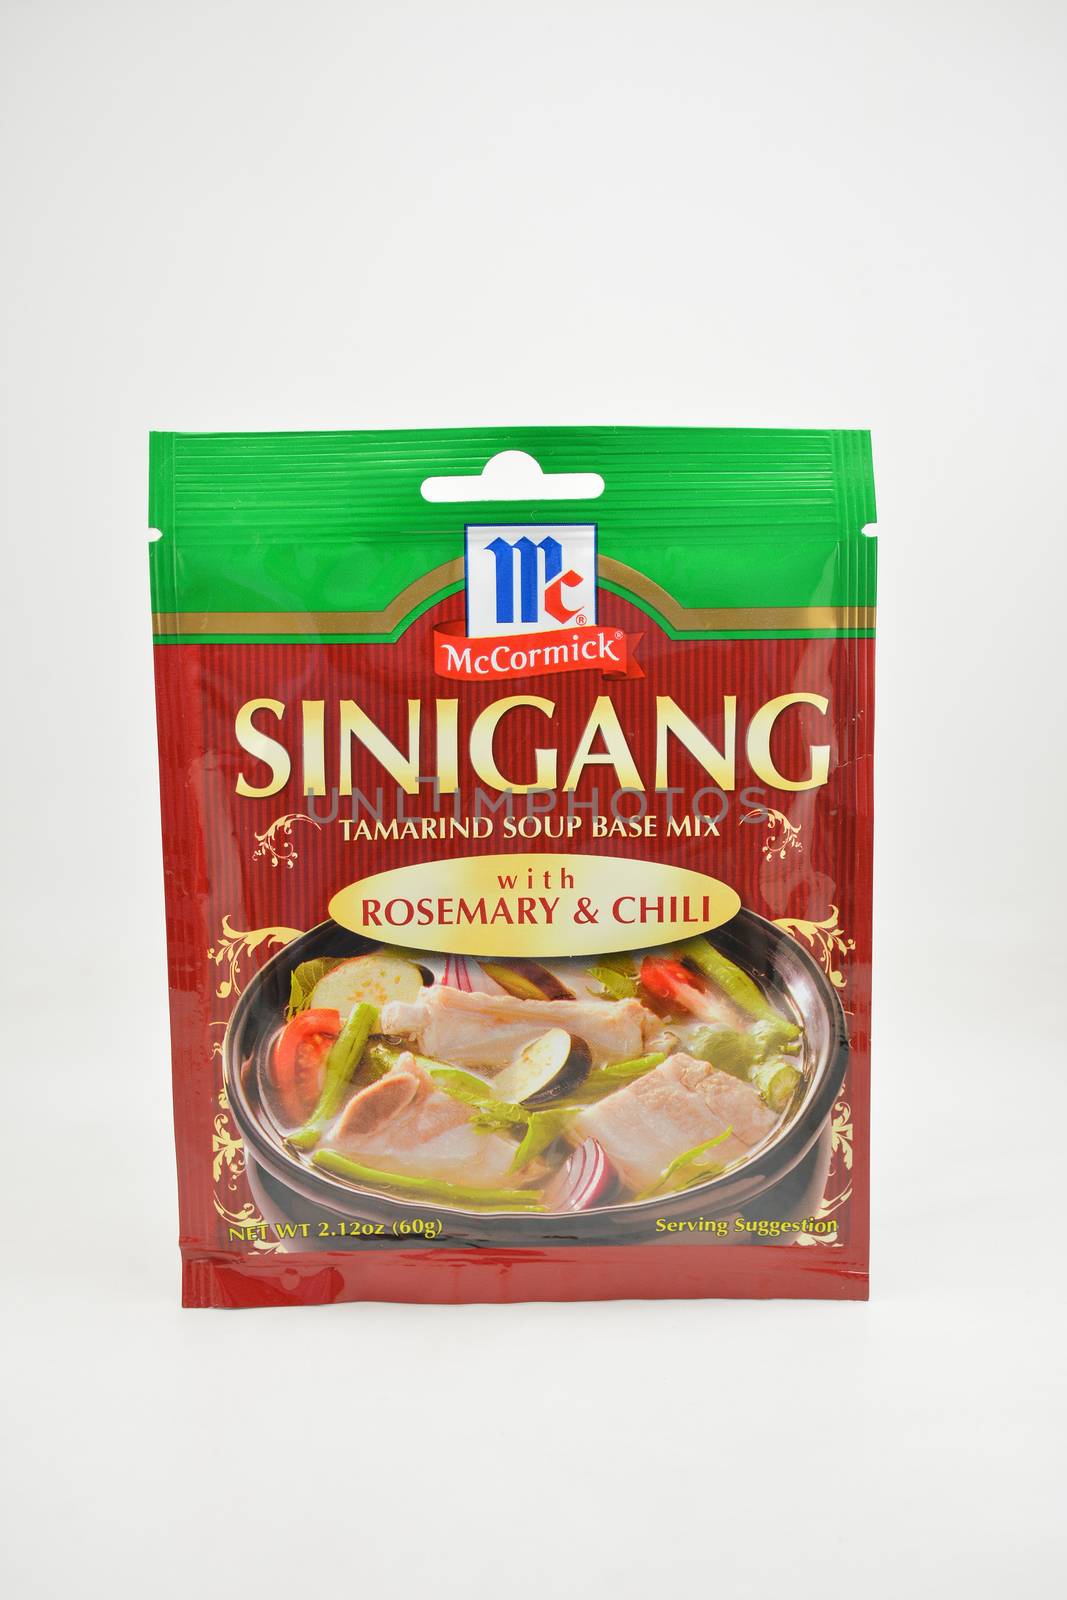 MANILA, PH - JUNE 26 - McCormick sinigang tamarind soup base mix with rosemary and chili on June 26, 2020 in Manila, Philippines.